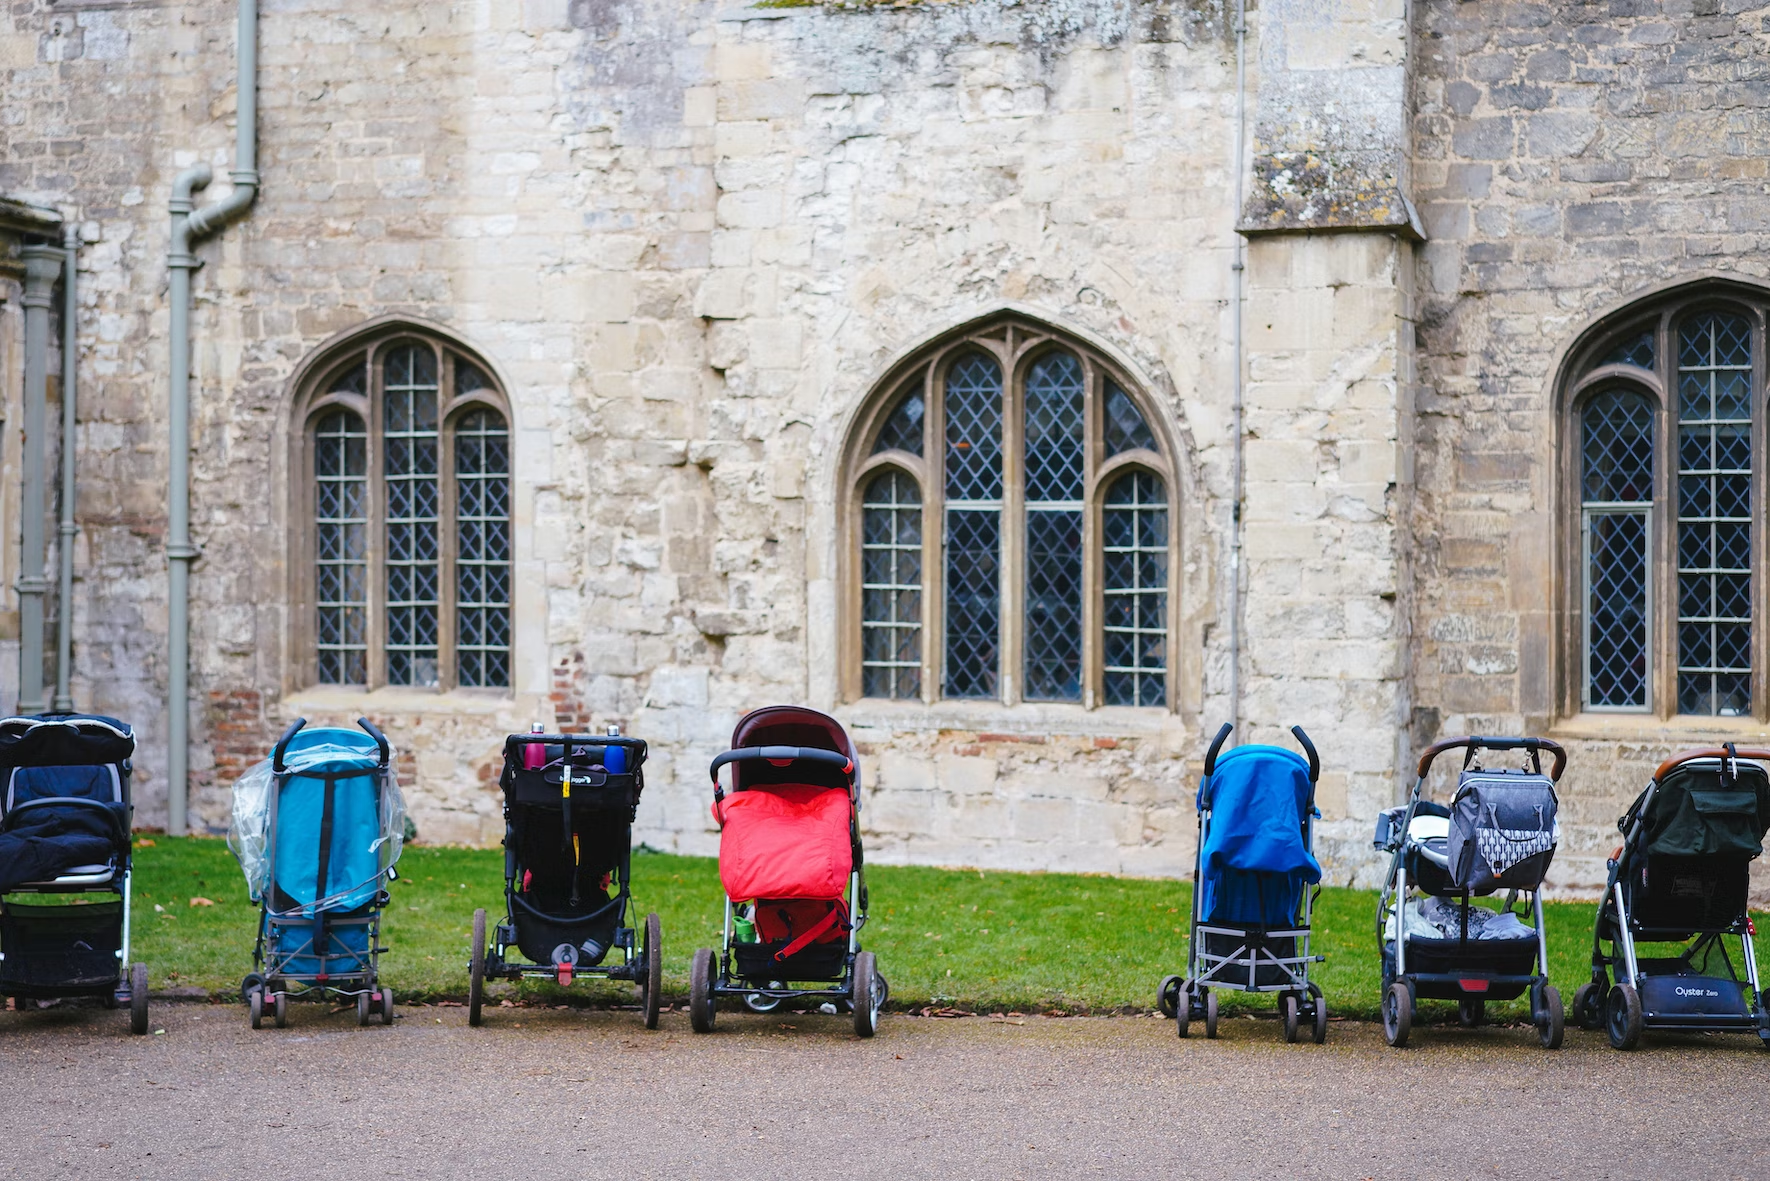 Different kinds of strollers